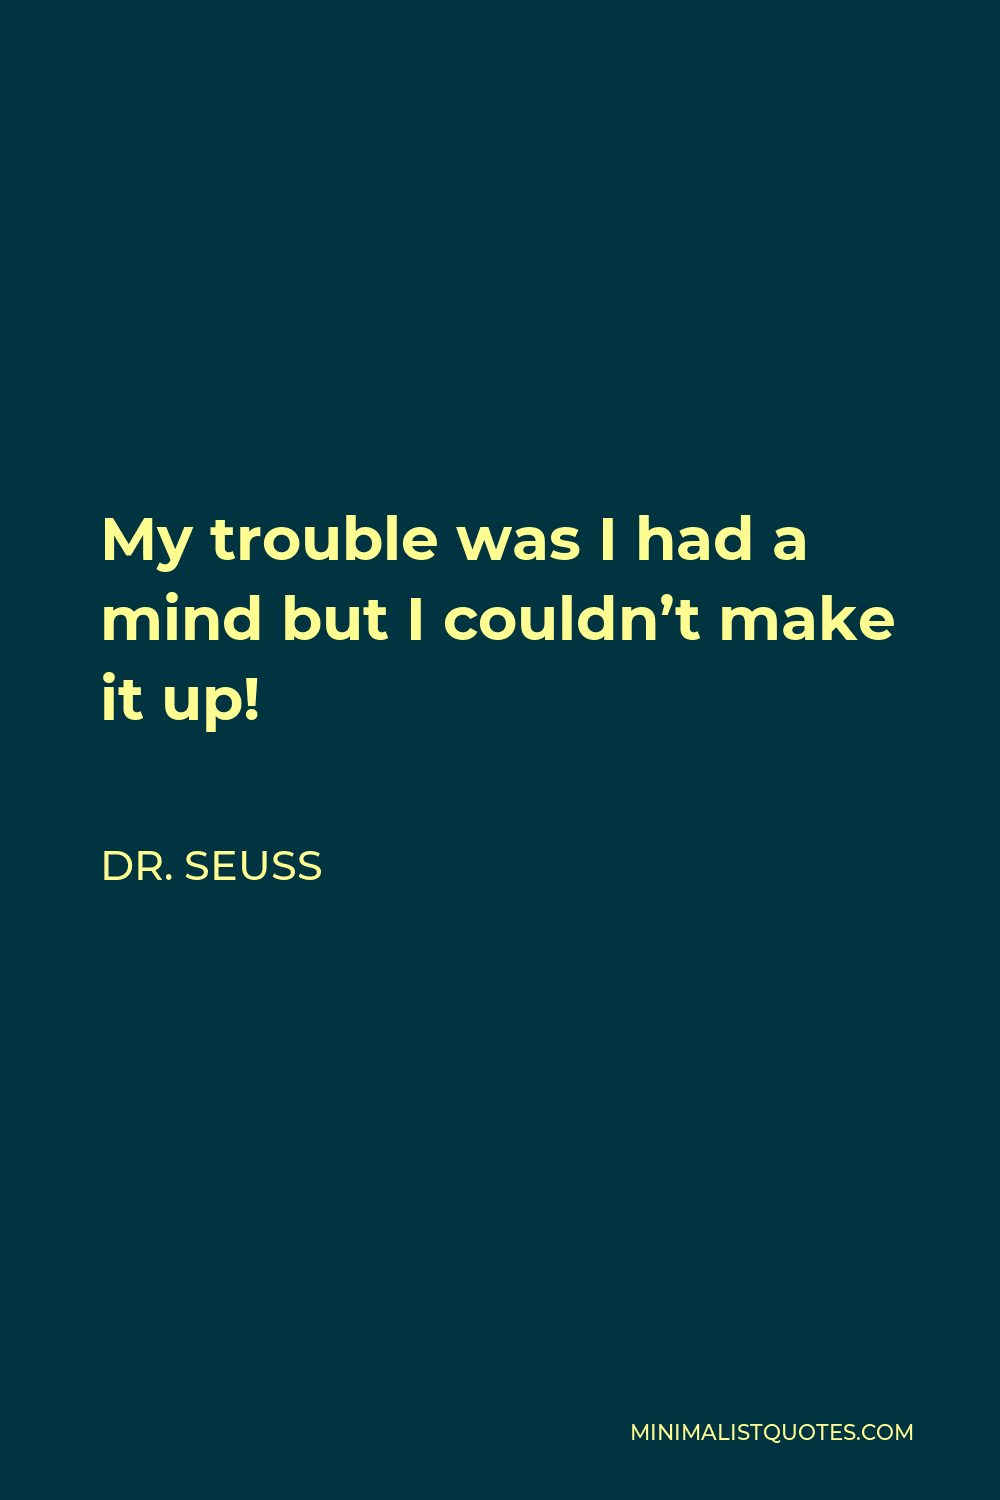 Dr. Seuss Quote: My trouble was I had a mind but I couldn't make it up!